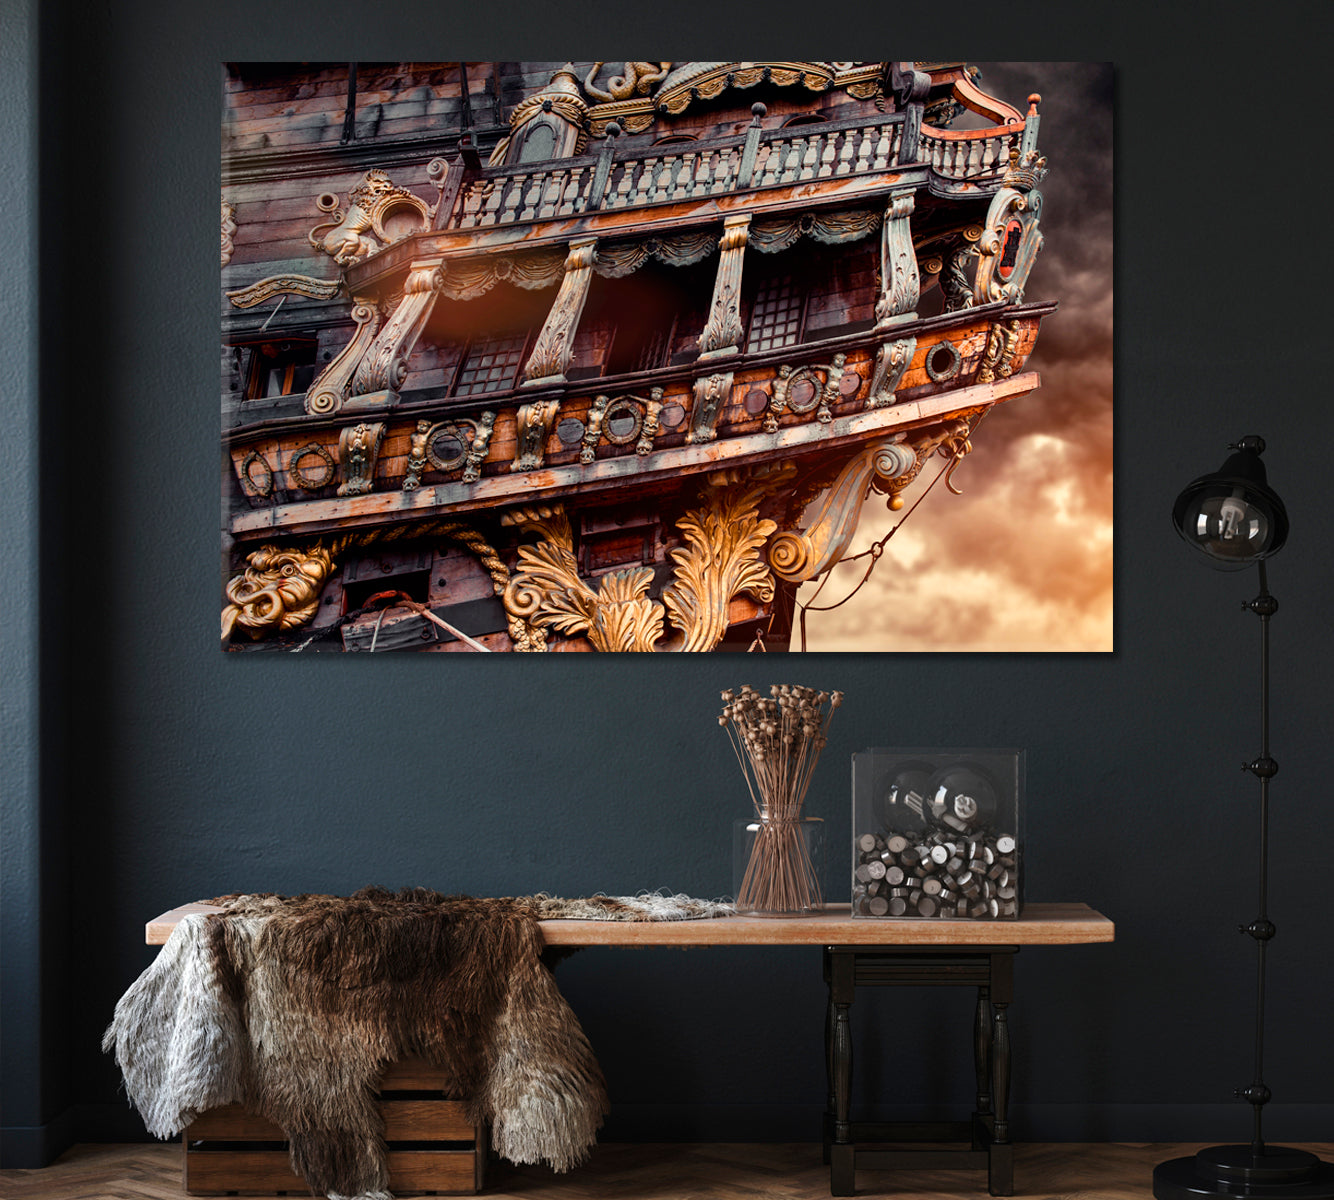 Old Pirate Ship Canvas Print ArtLexy 1 Panel 24"x16" inches 